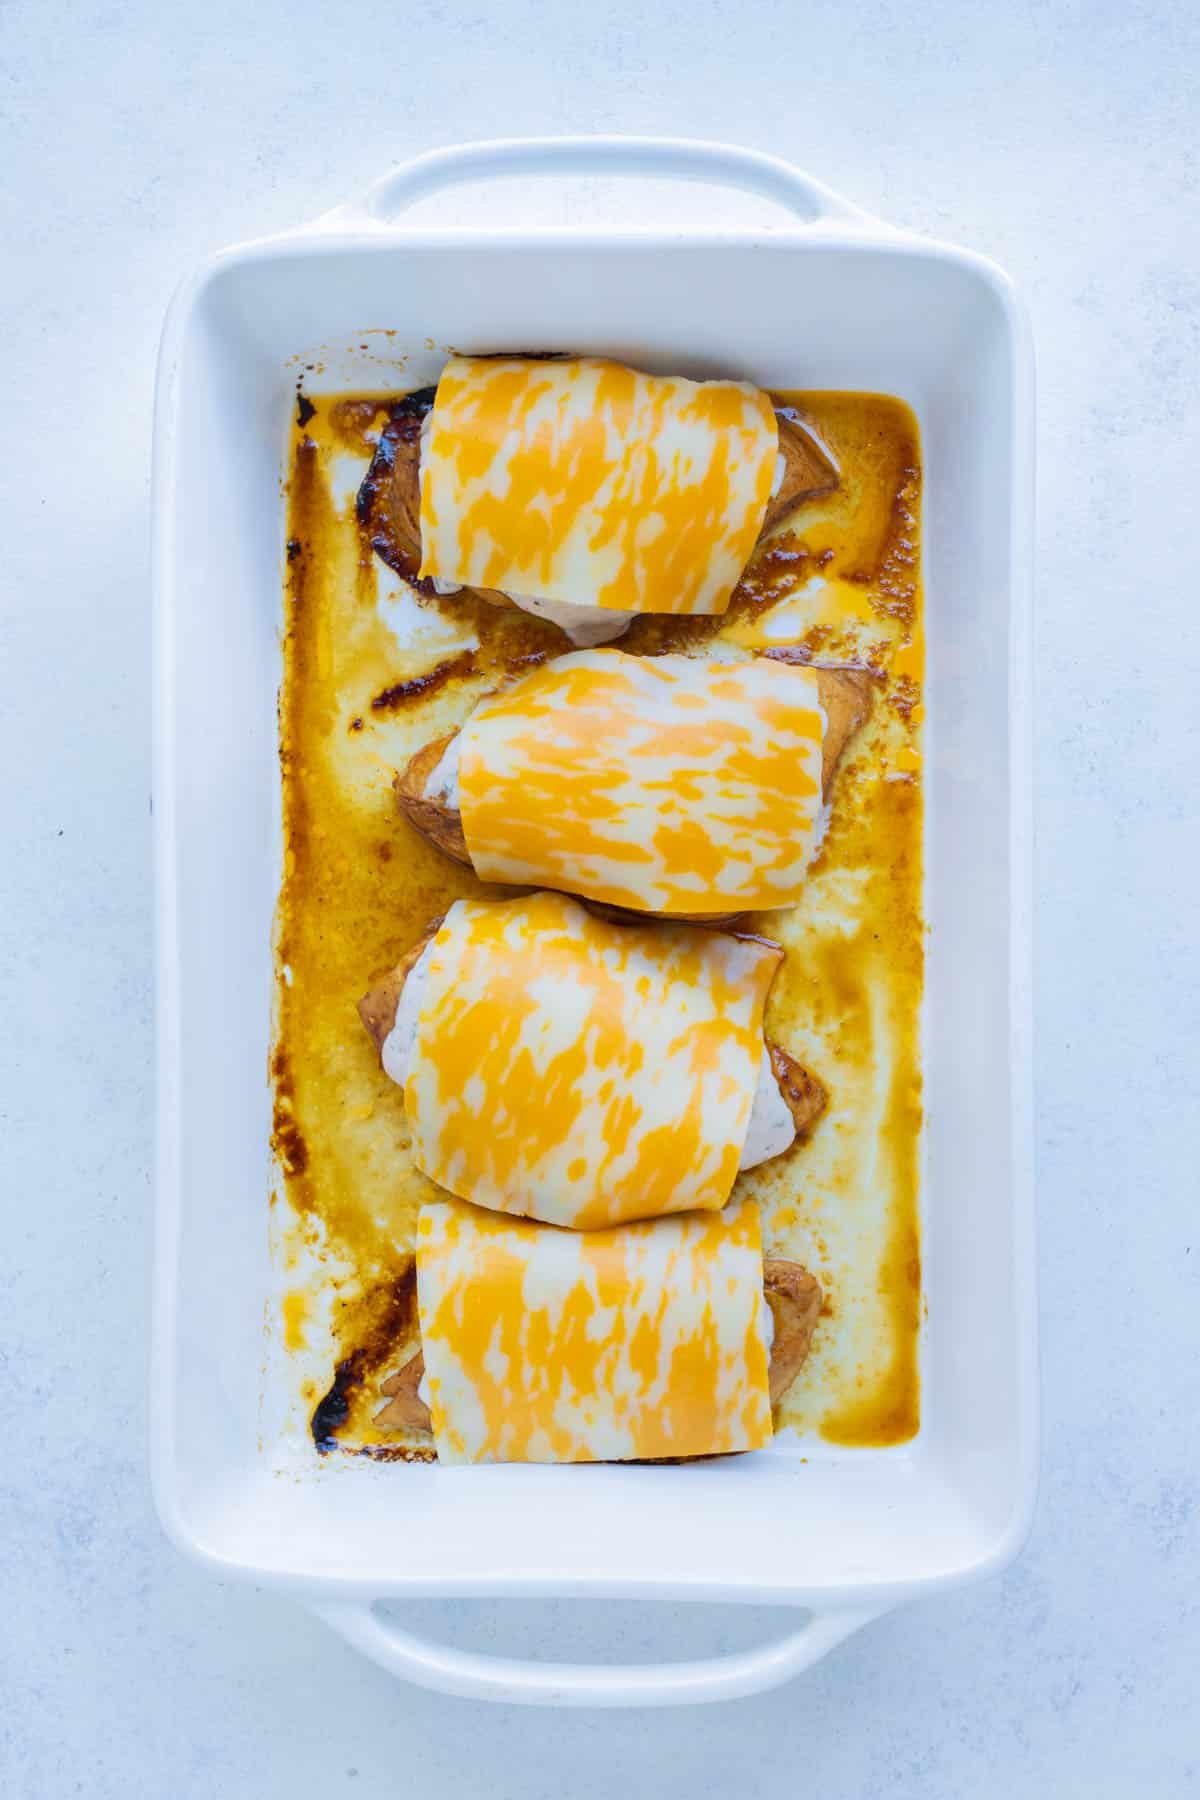 Sliced cheese is then placed over the fiesta chicken breasts.